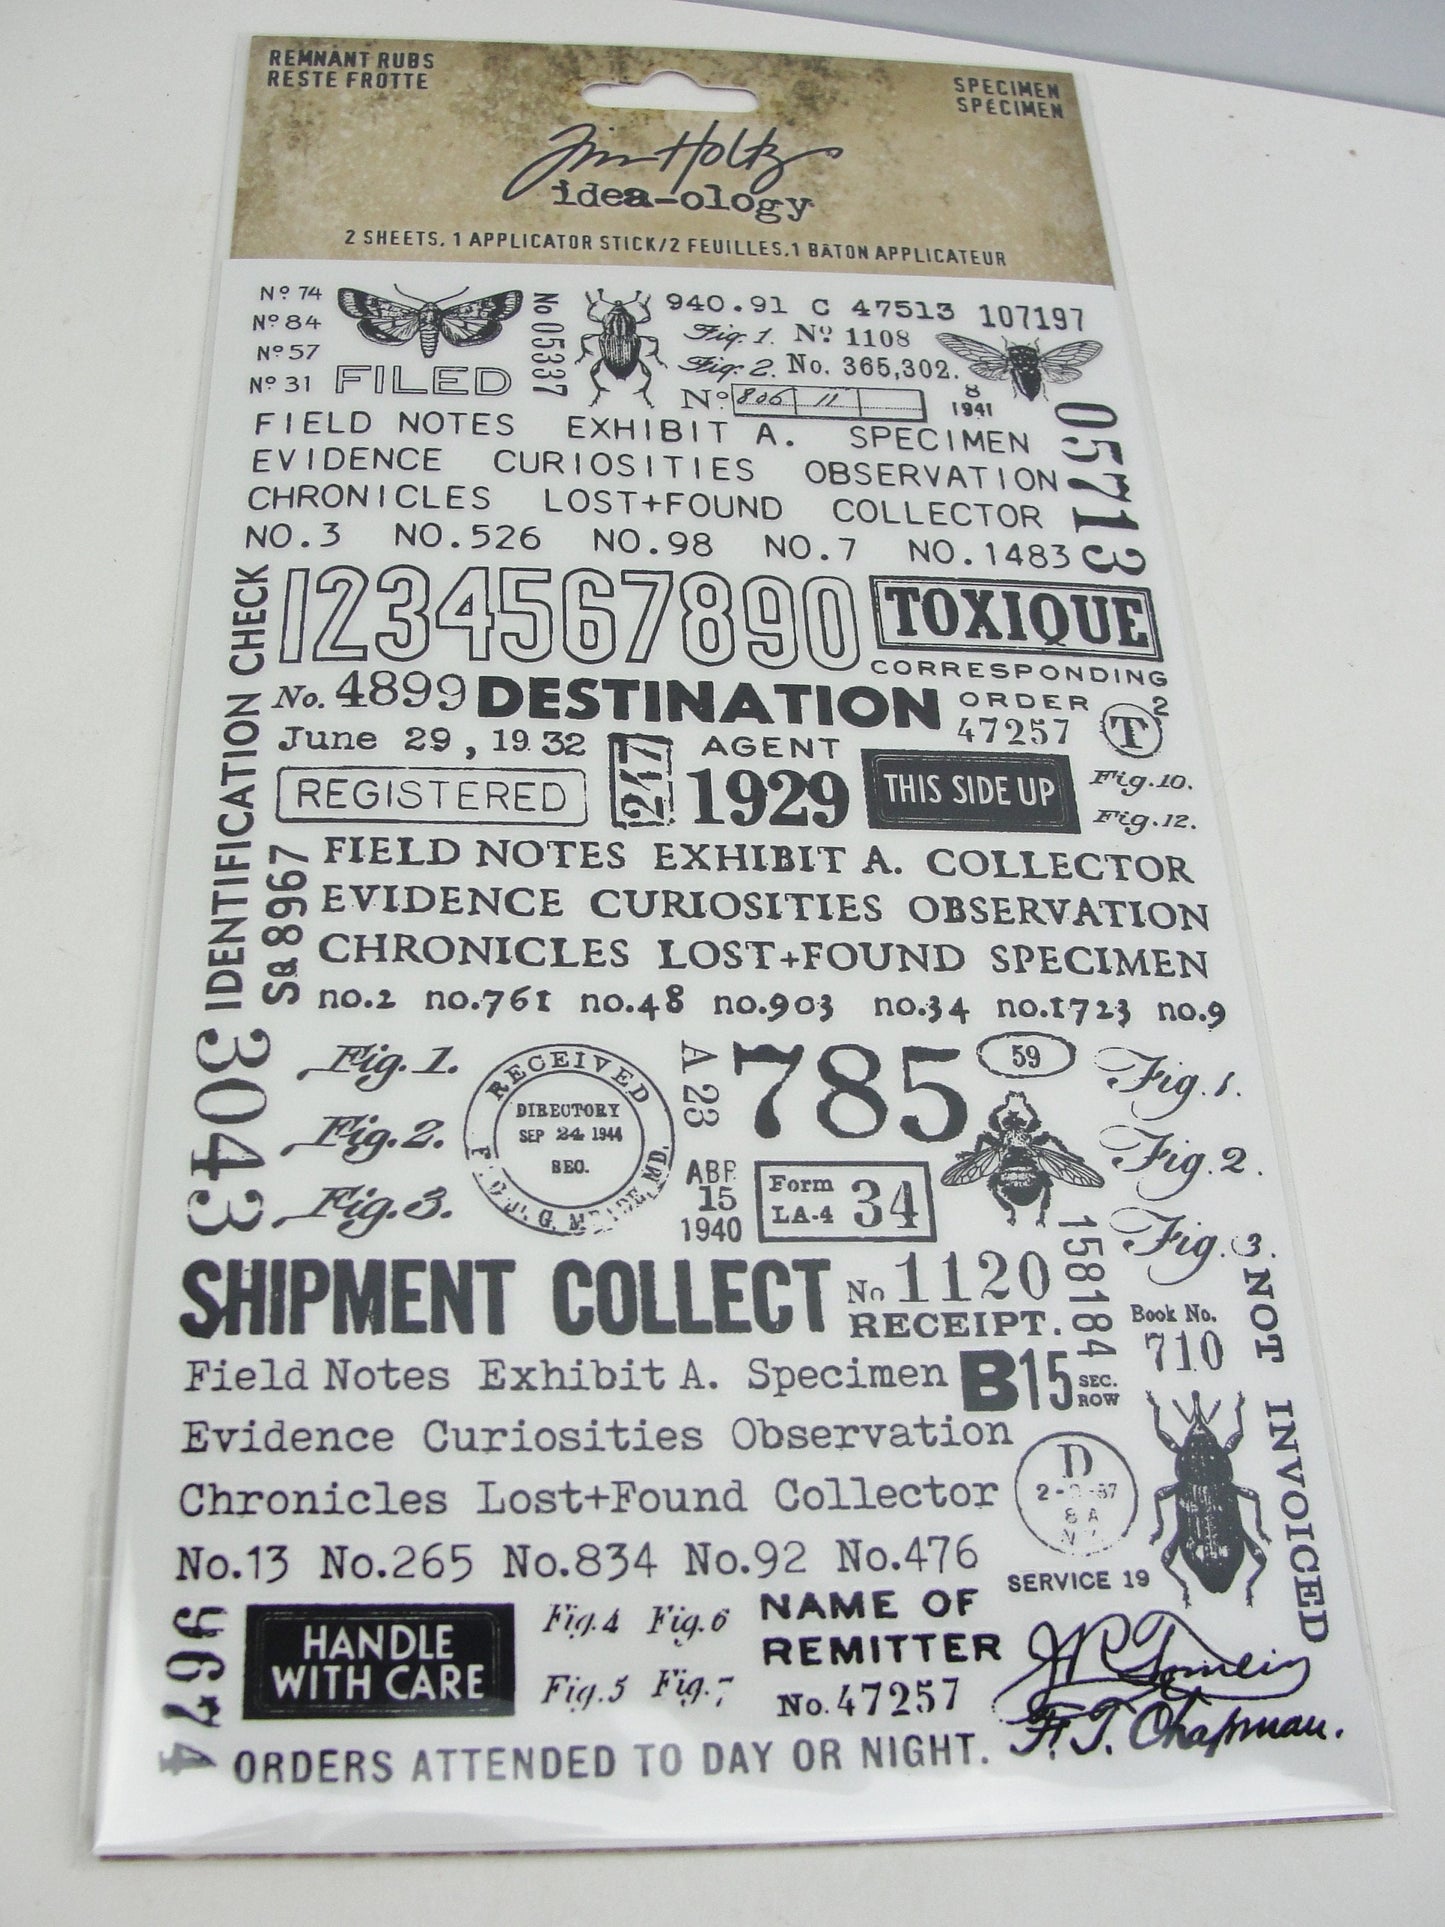 Tim Holtz Rub-ons choose Tiny Text, Gilded Accents, Specimen, Halloween, Eccentric or Christmas